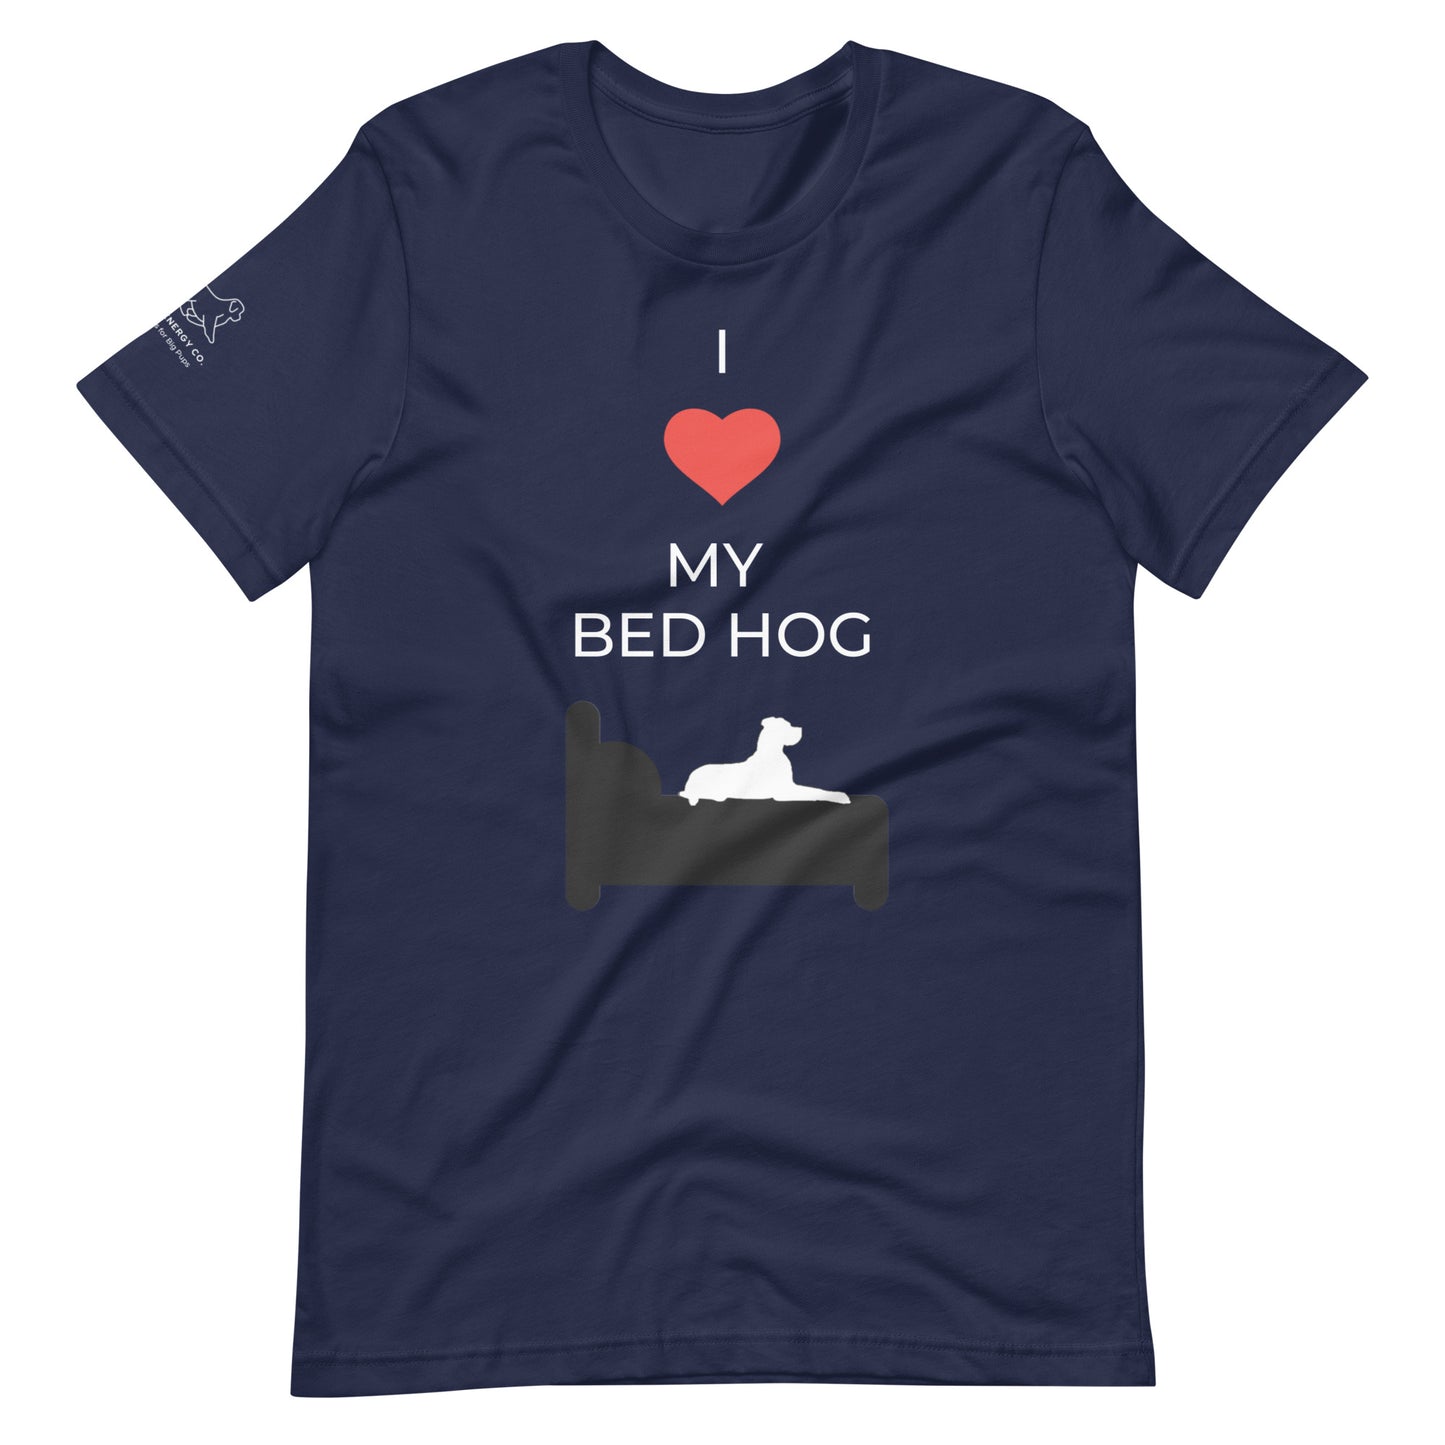 Front of a navy blue t-shirt that reads "I love my bed hog" in white text over an illustration that is the white silhouette of a large dog laying on the deep gray silhouette of a bed. The word "love" is replaced by a red heart symbol.